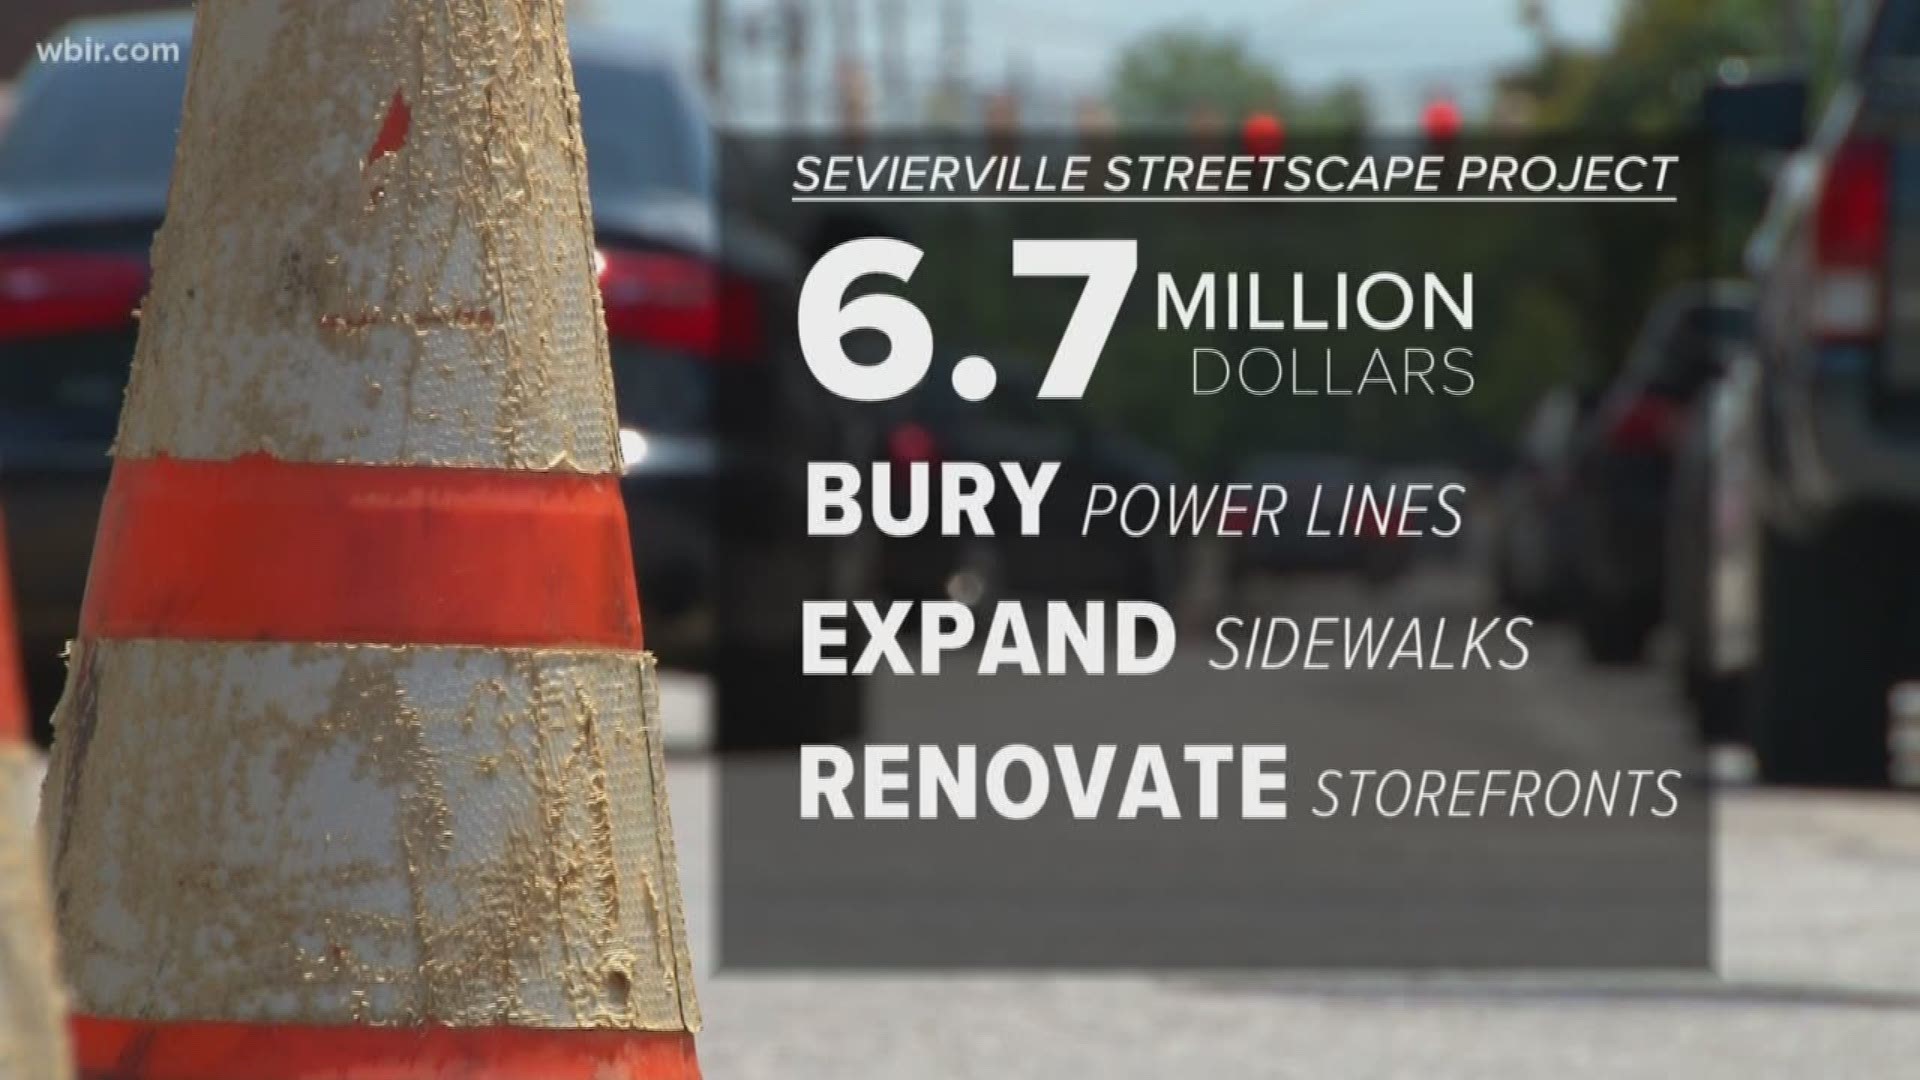 Downtown Sevierville is expecting big changes during the next 18 months. A streetscape project has businesses excited about a new walkable and attractive downtown area.